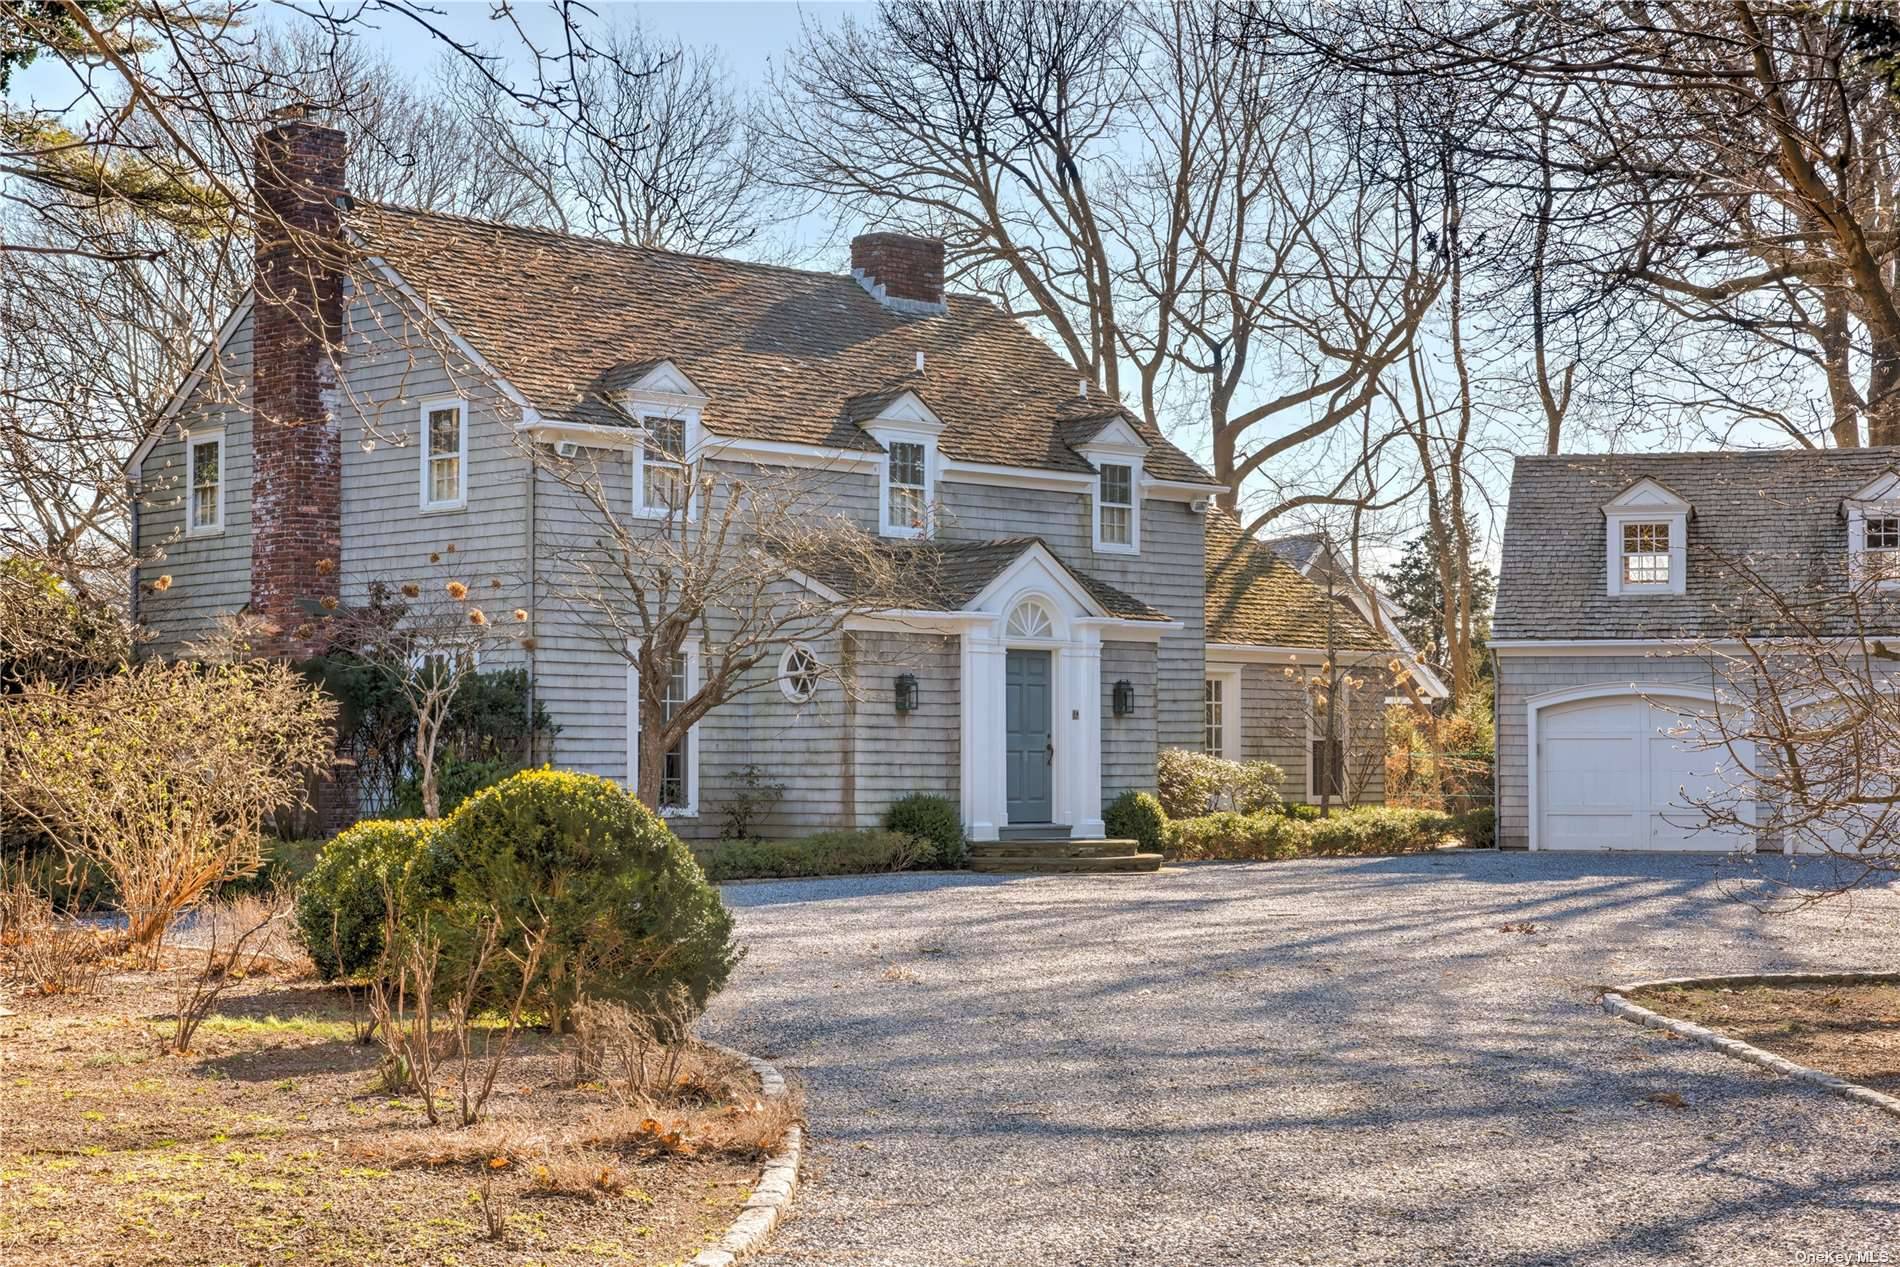 Enjoy holidays in the Hamptons at this charming 4 bedroom4.